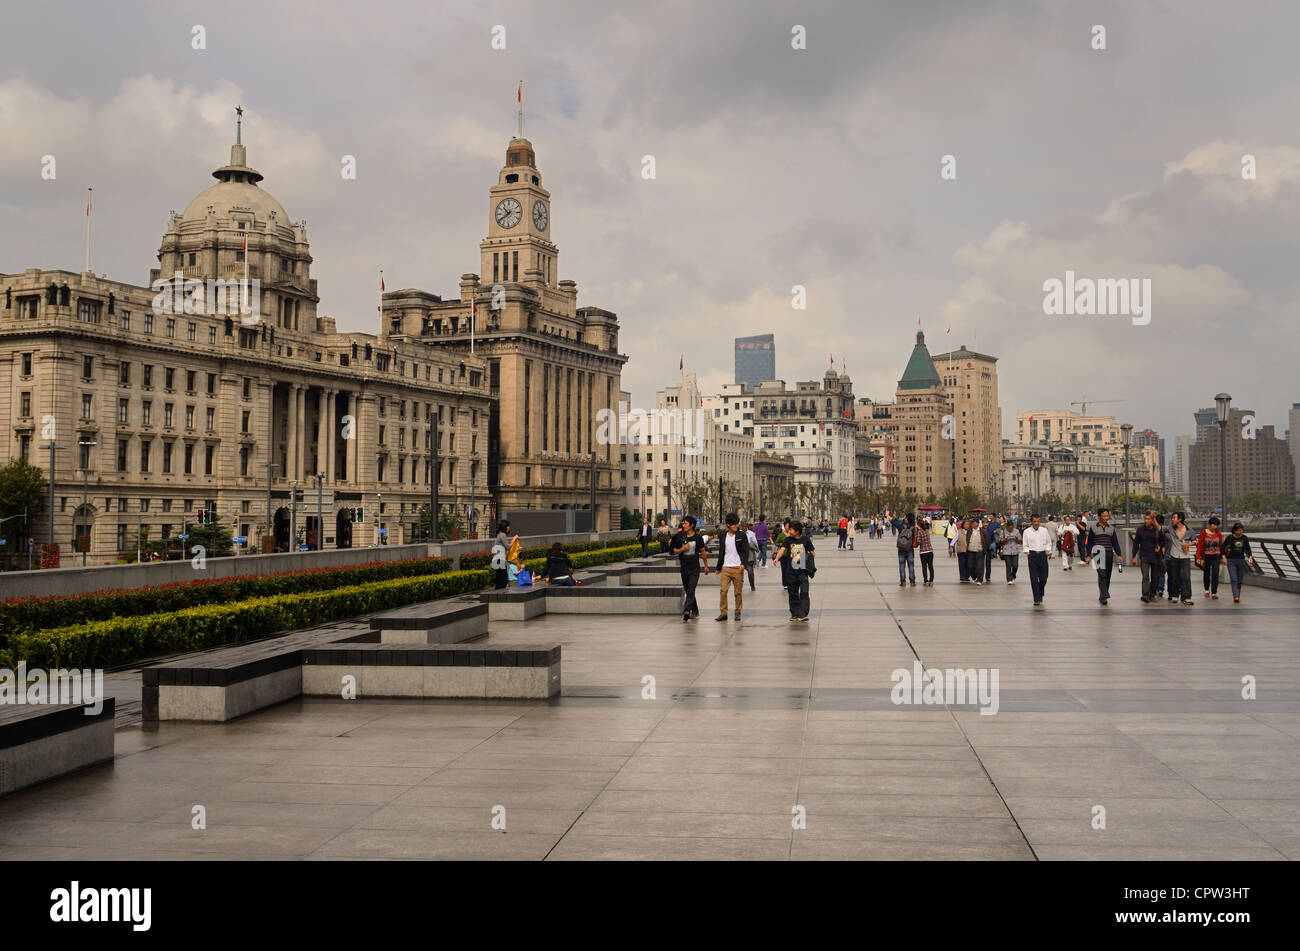 Groups of tourists walking on a wet Bund promenade after a rainstorm with old buildings in Shanghai China Stock Photo